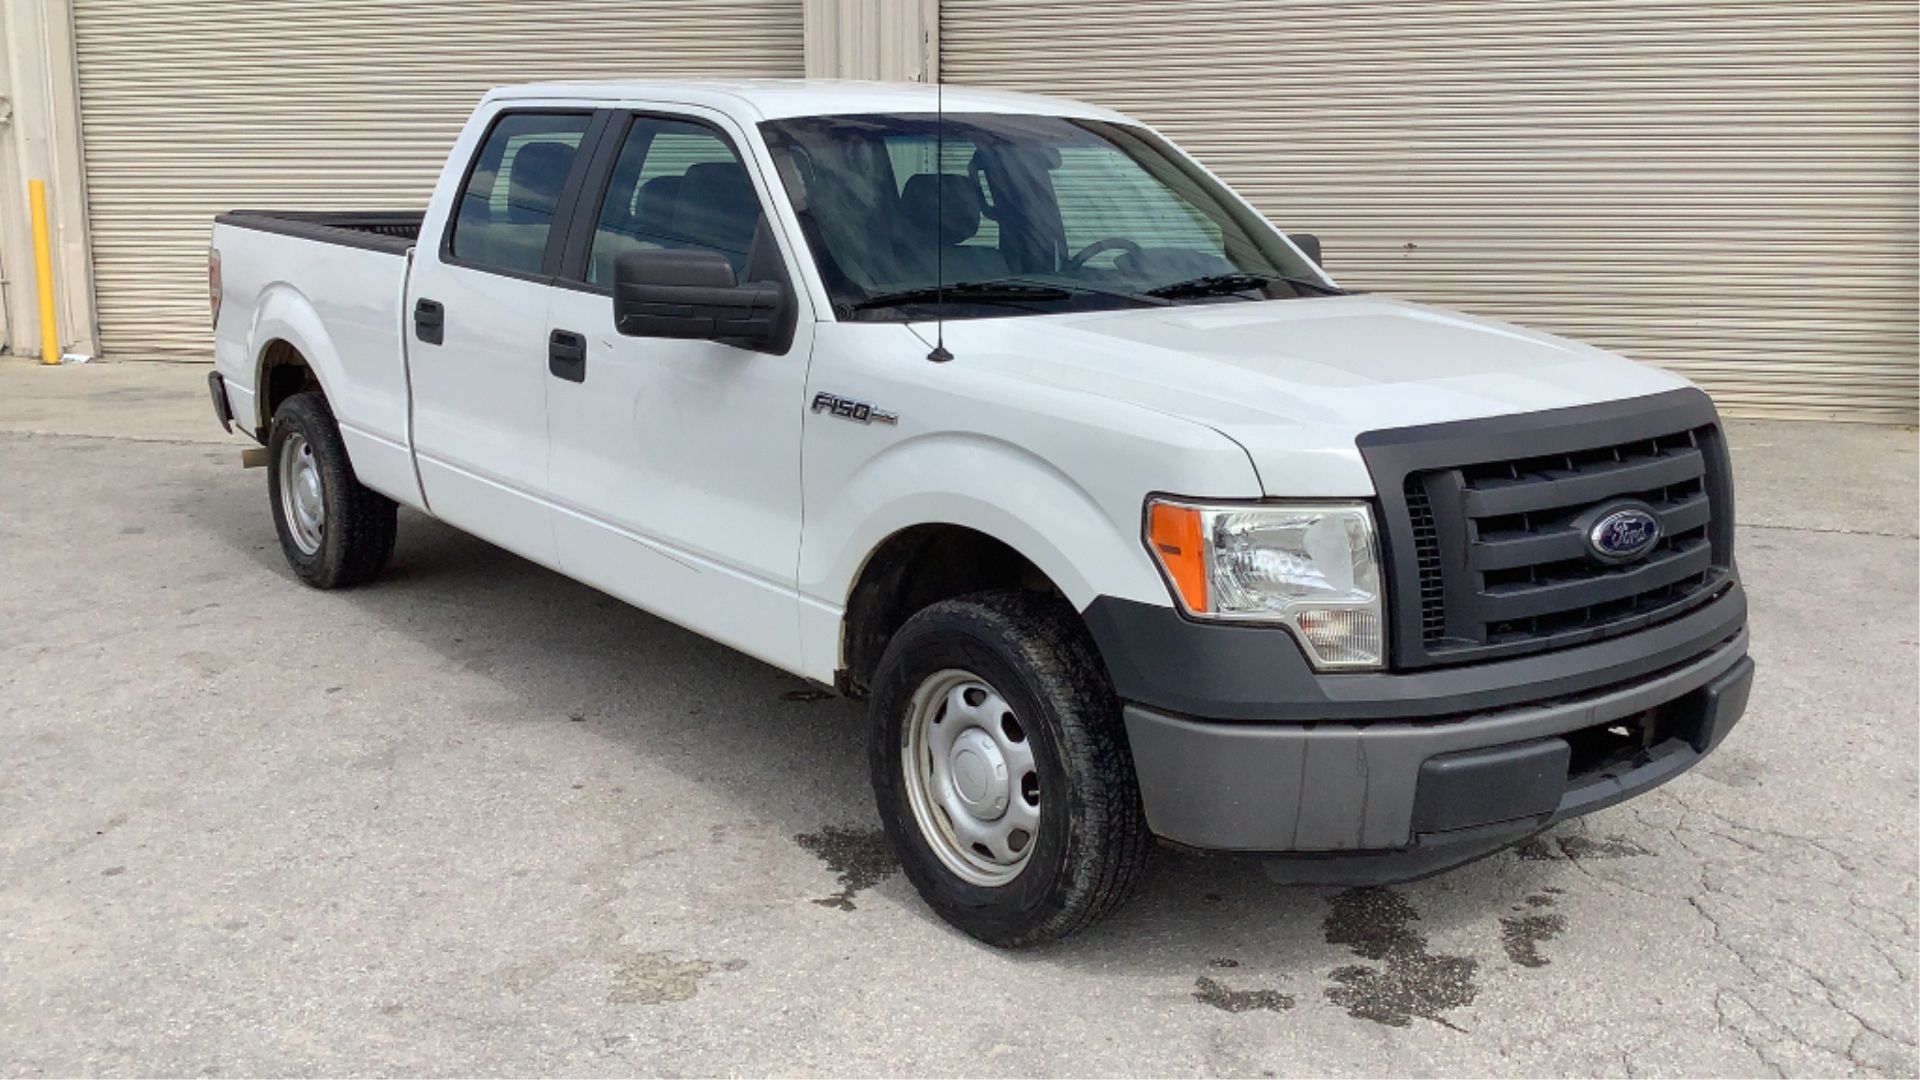 2012 Ford F150 XL Crew Cab 2WD - Image 4 of 86